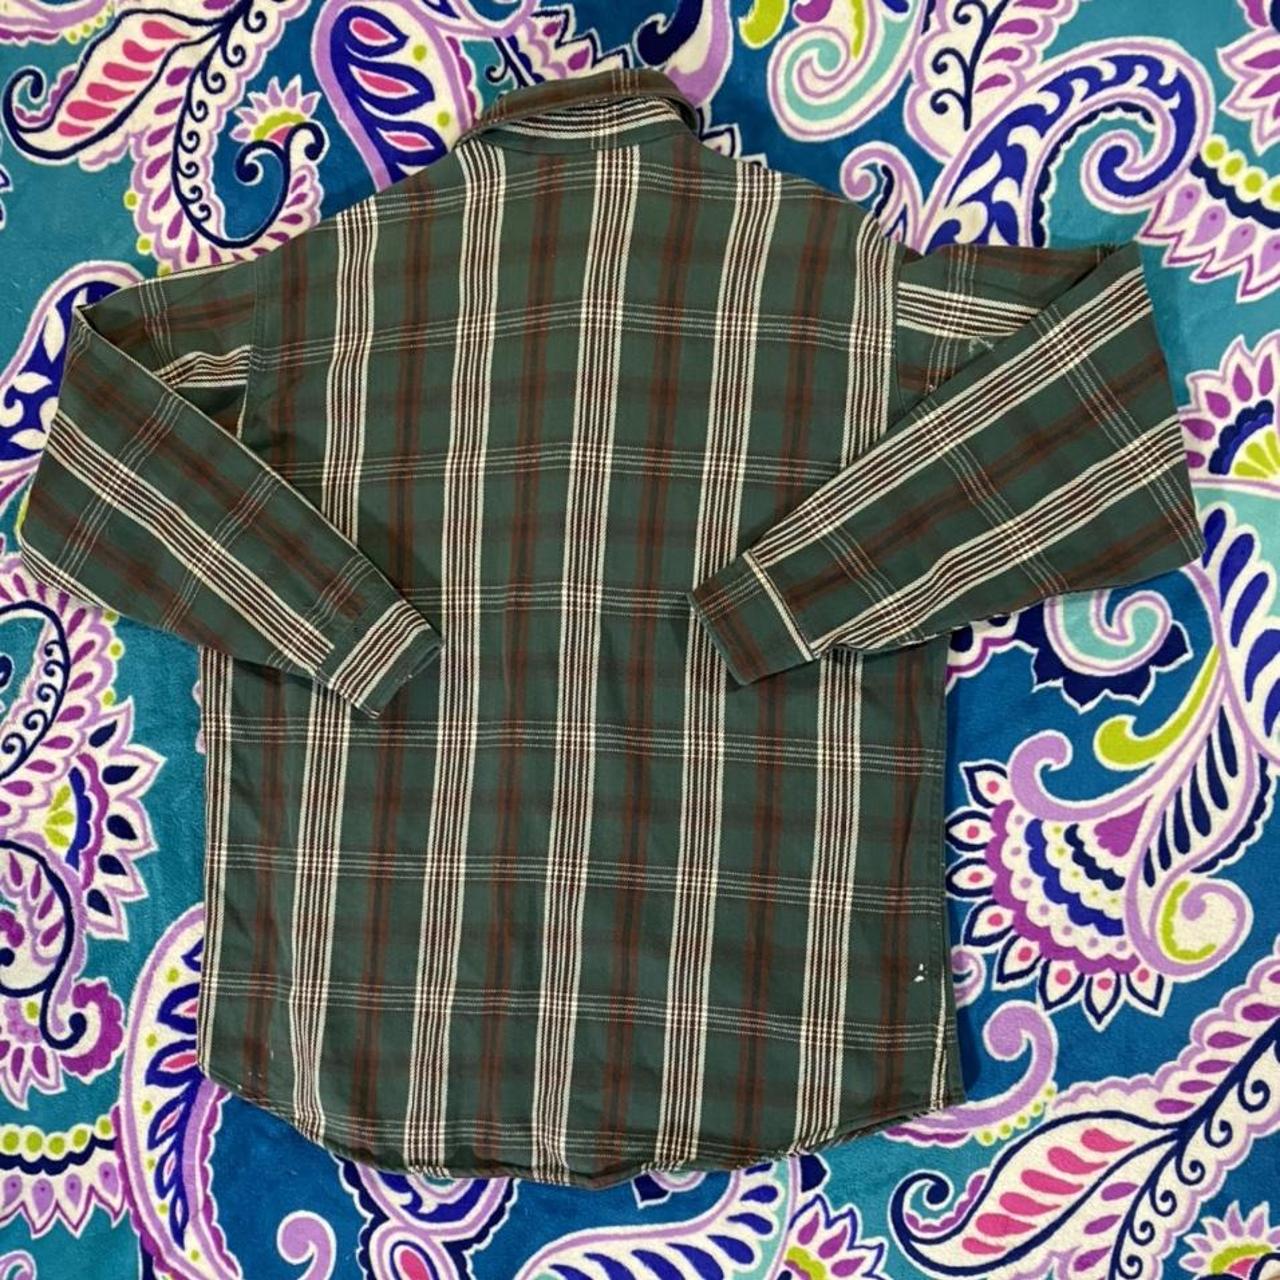 Product Image 3 - Vintage 70s Painters Flannel! This